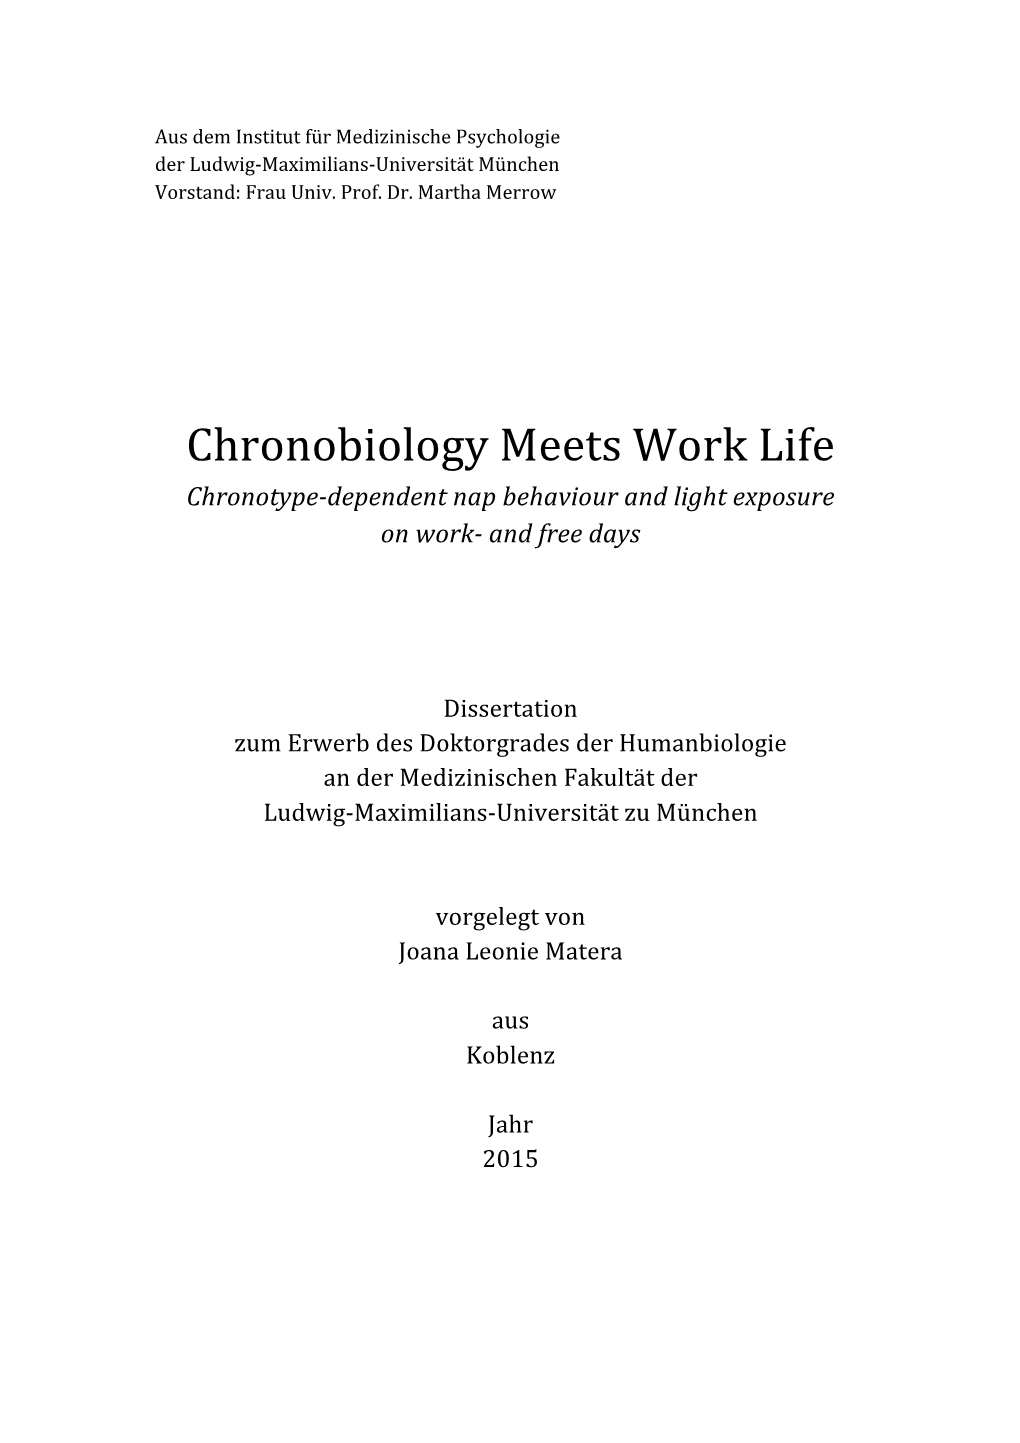 Chronobiology Meets Work Life Chronotype-Dependent Nap Behaviour and Light Exposure on Work- and Free Days